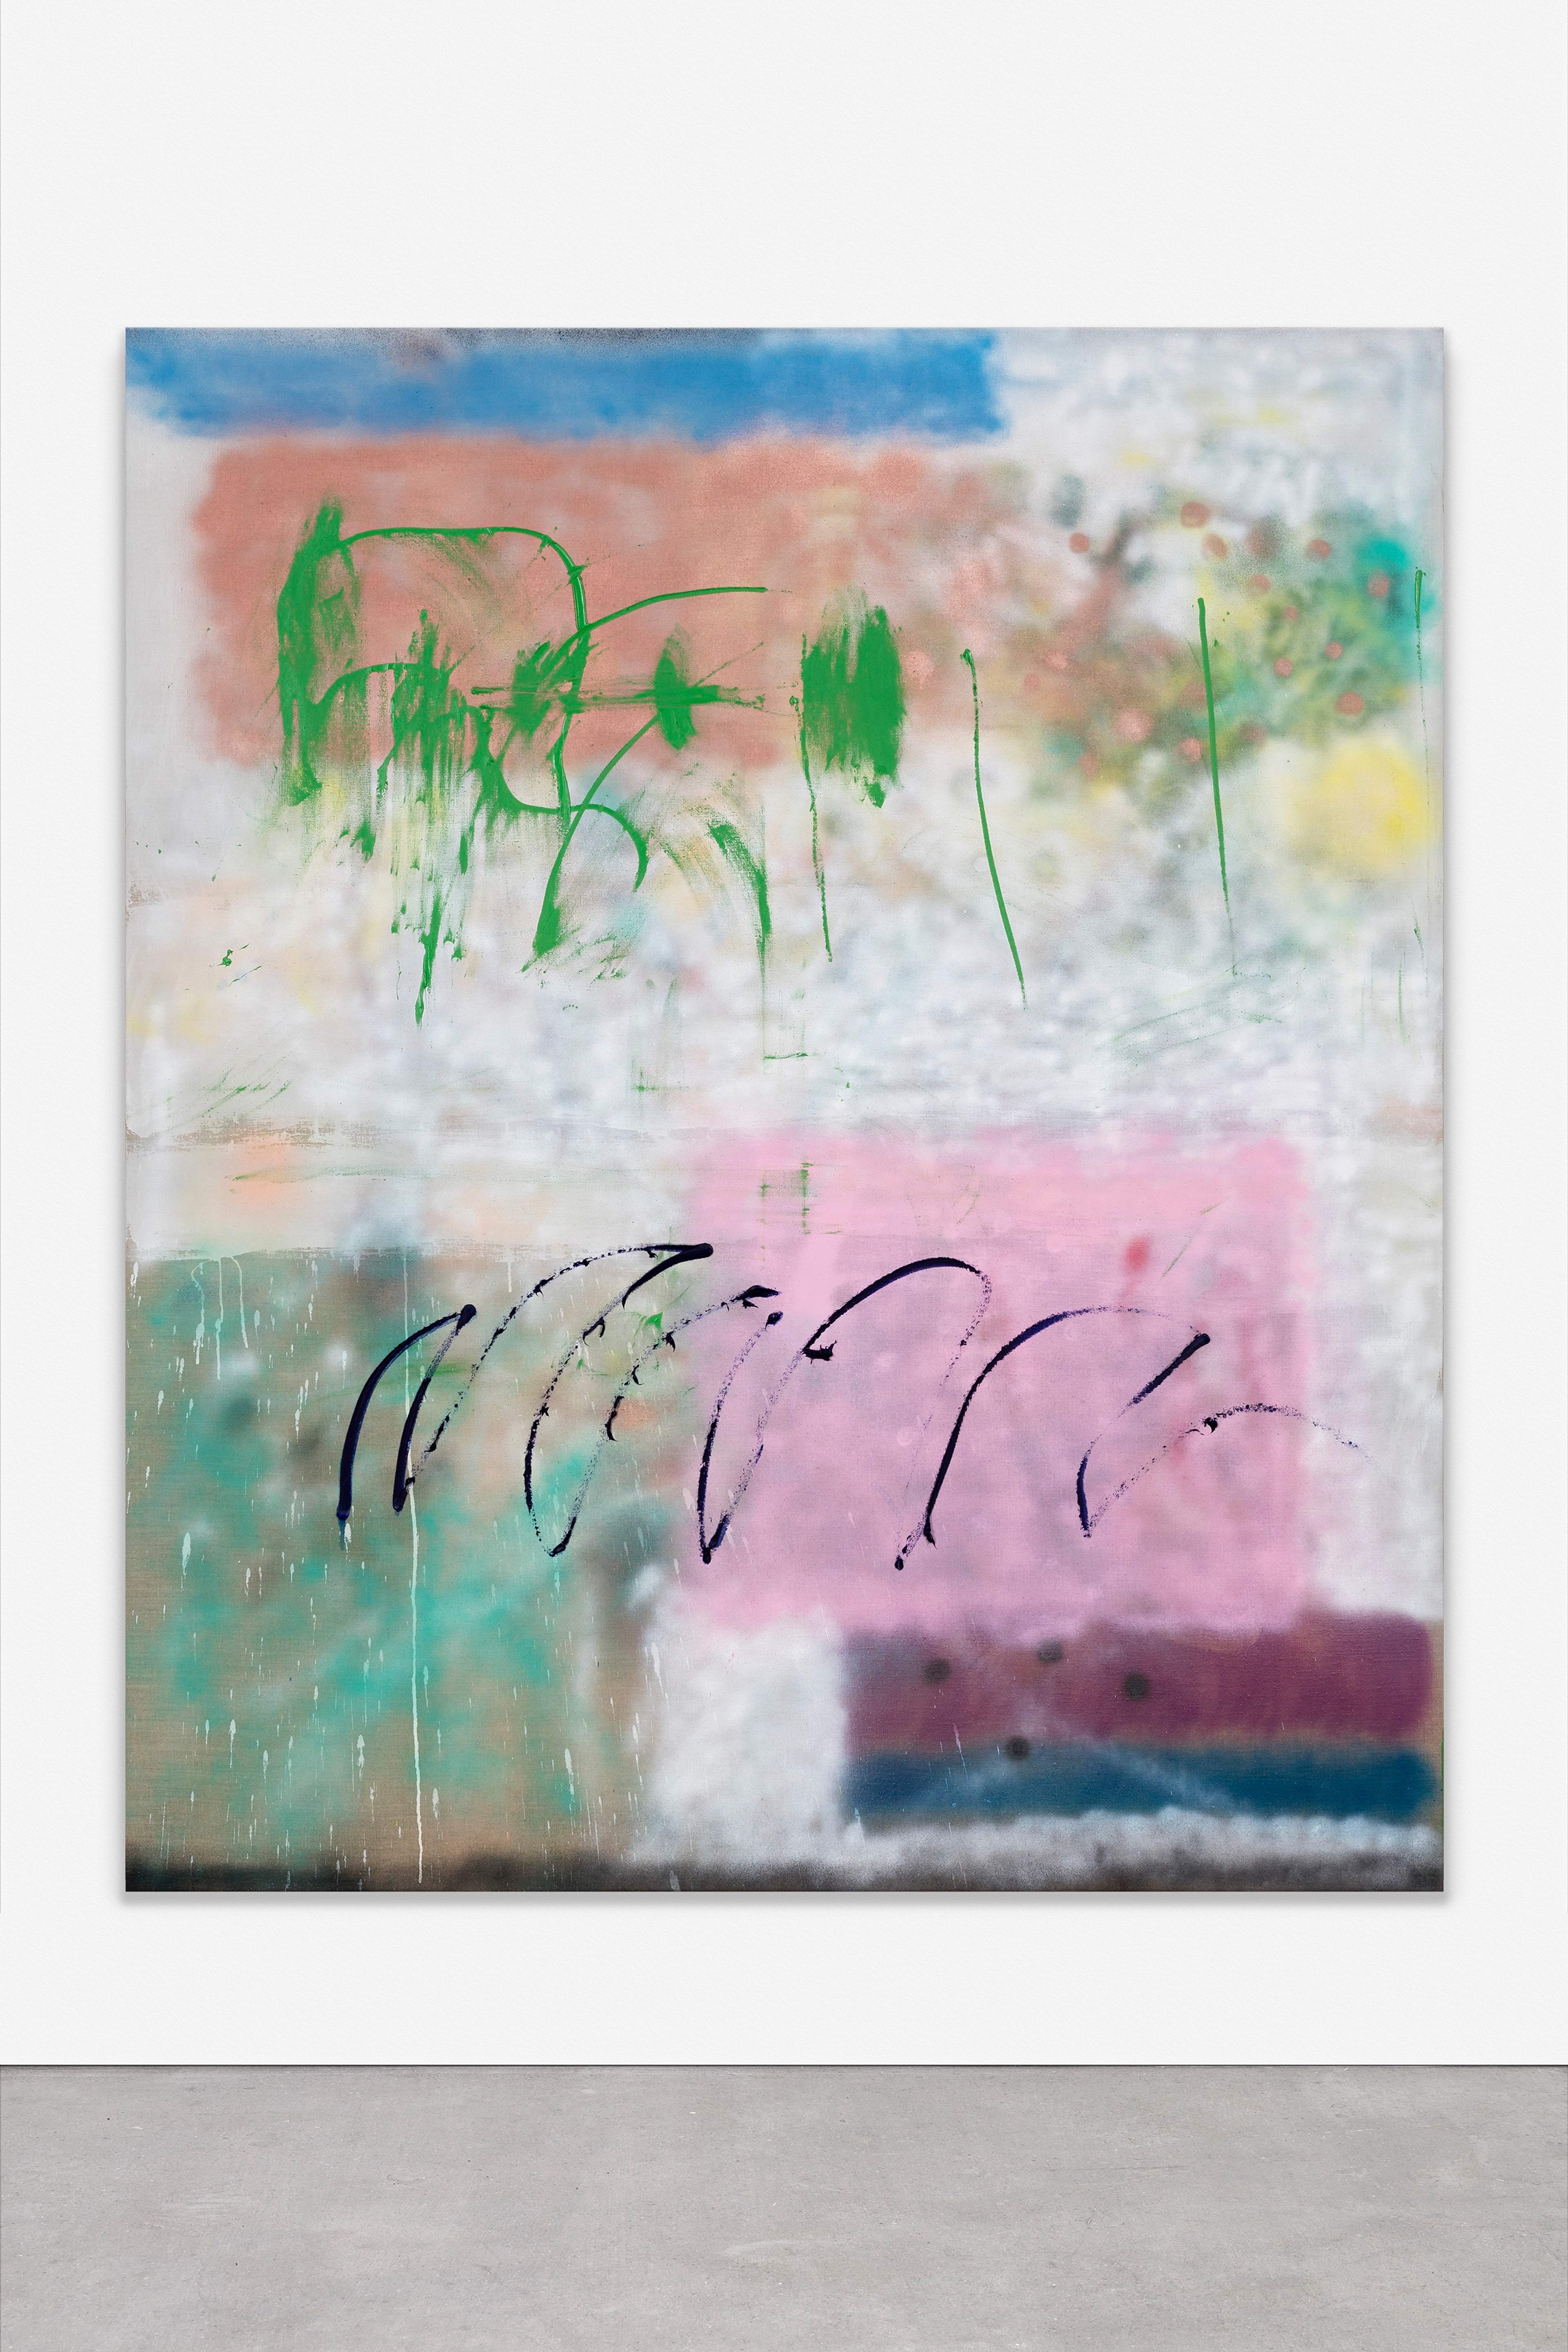 Sebastian Helling, Kenmoore Ave / 3311 W 3rd, 2015, spray paint and oil on canvas, 220x185 cm